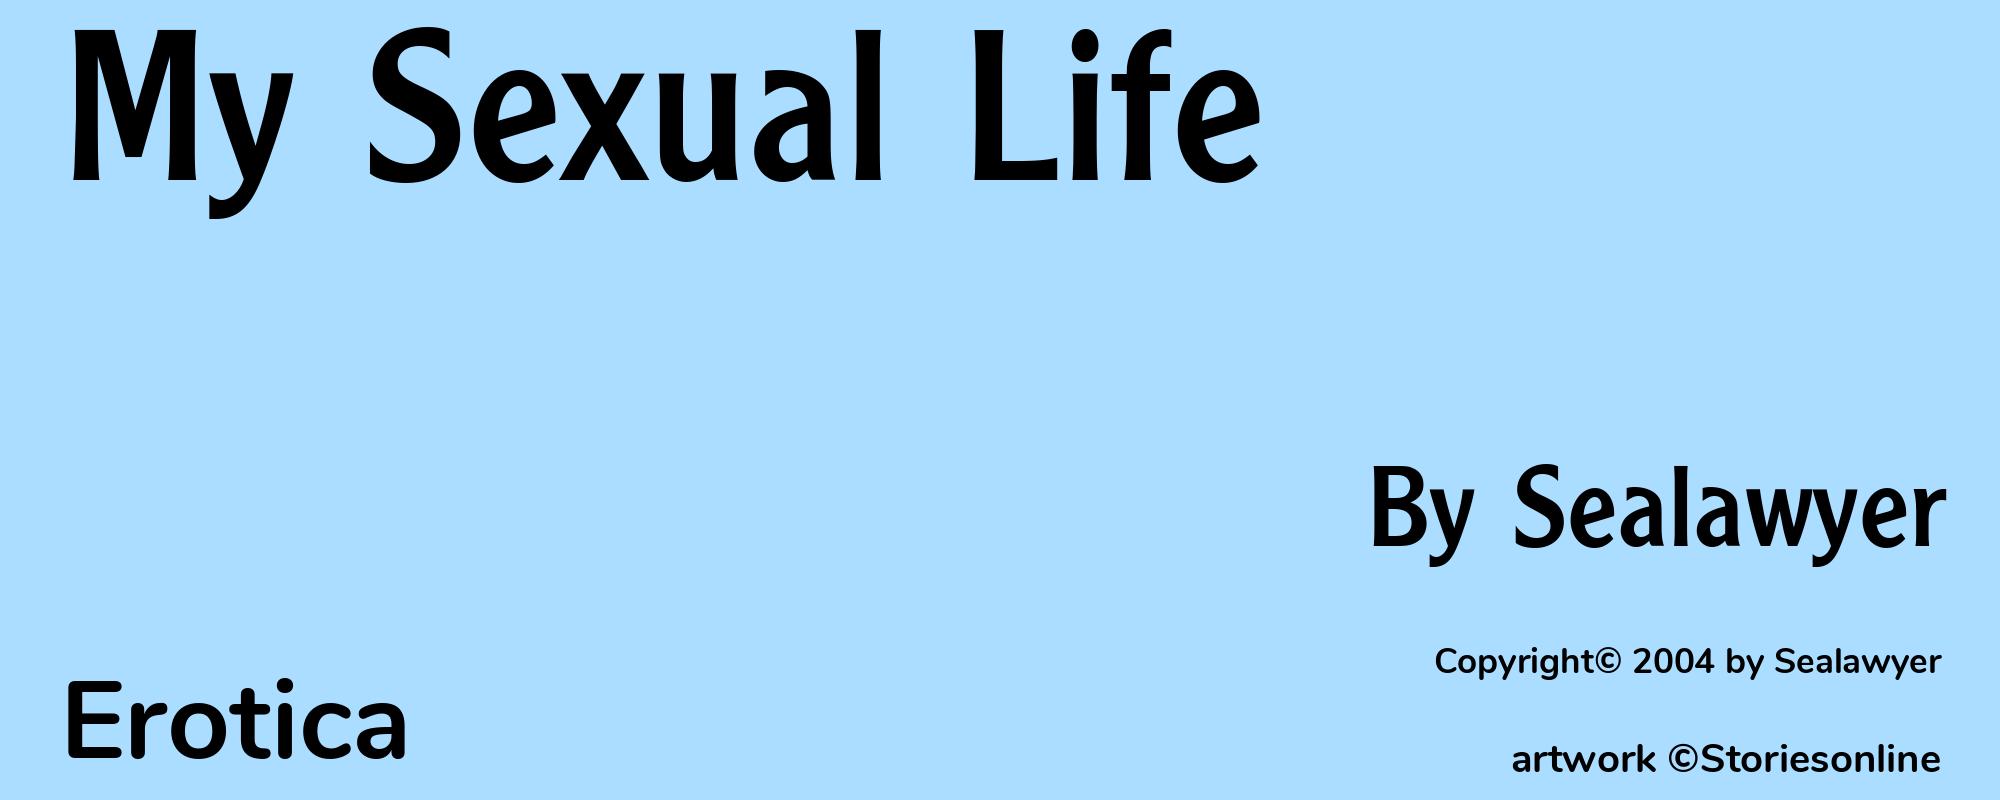 My Sexual Life - Cover